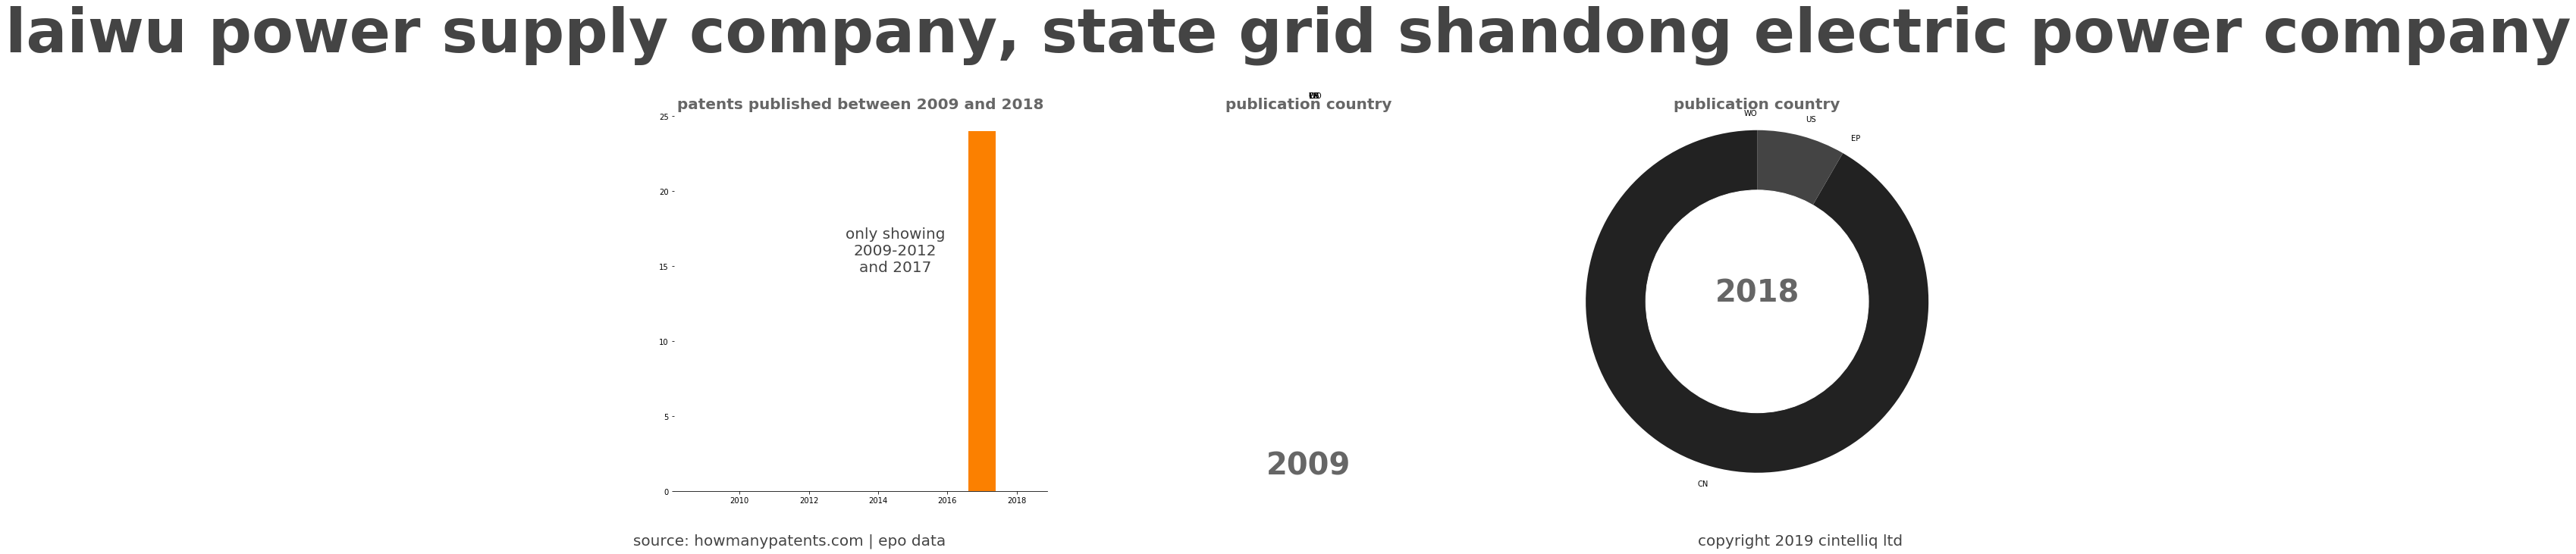 summary of patents for Laiwu Power Supply Company, State Grid Shandong Electric Power Company